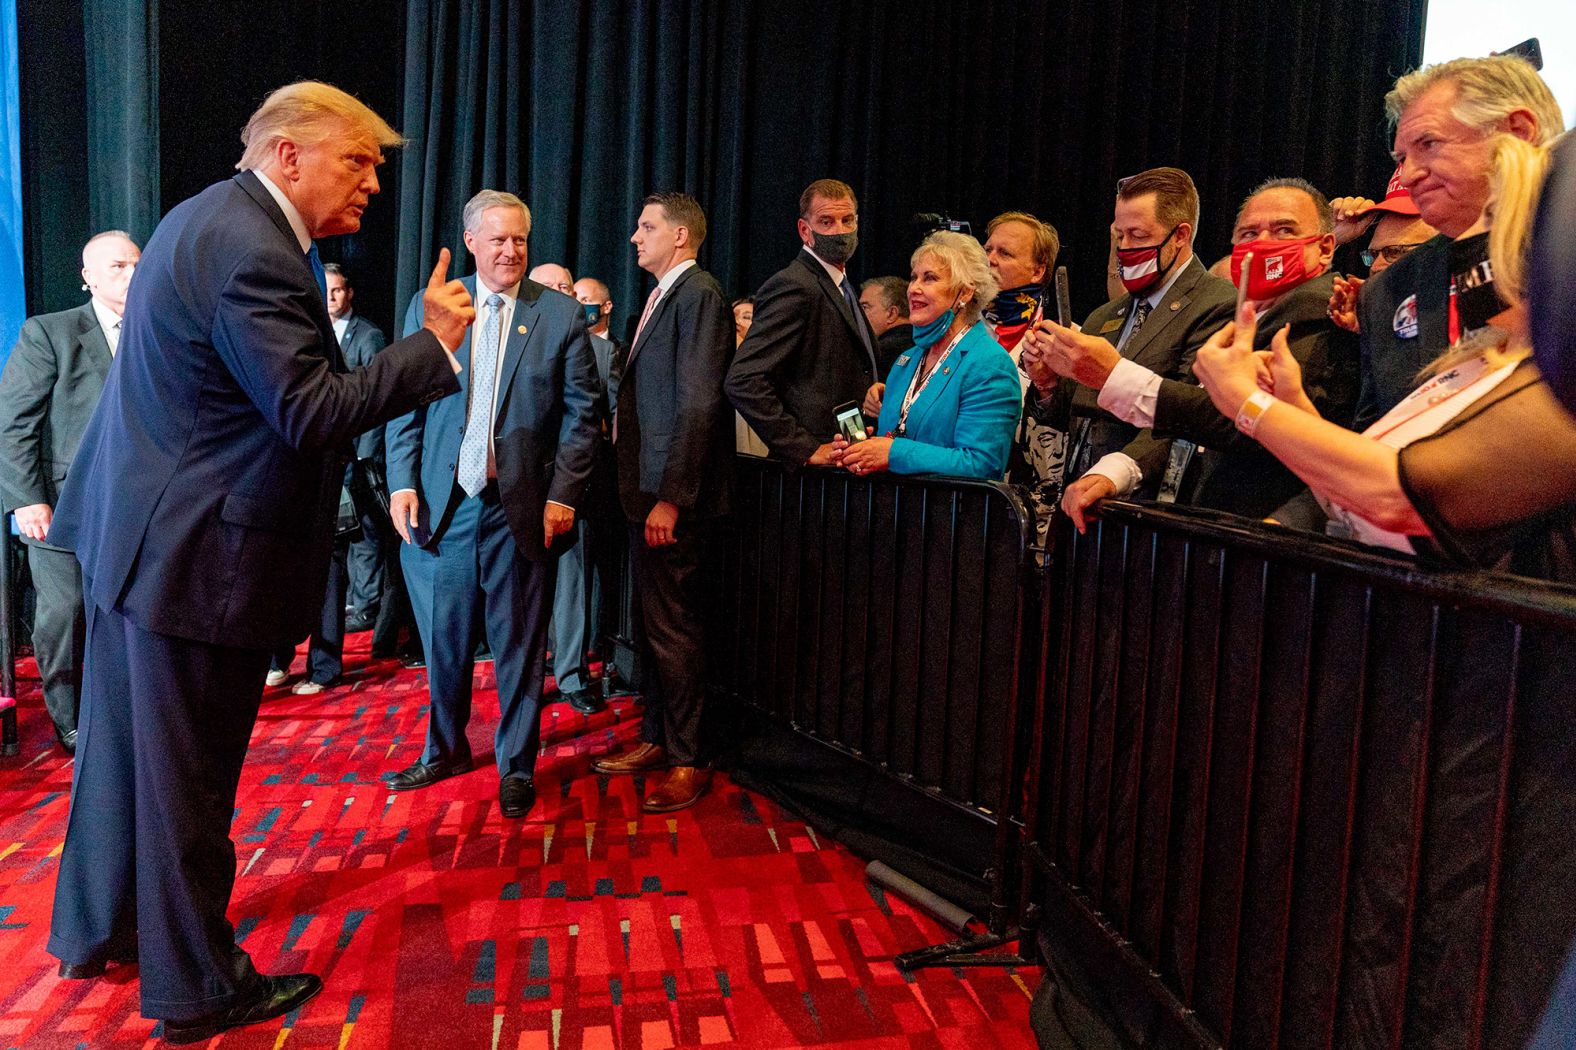 Trump poses for a photo after speaking in Charlotte early on Monday. Trump launched his convention week with <a href="https://www.cnn.com/2020/08/24/politics/trump-nomination-rnc/index.html" target="_blank">a bitter tirade,</a> complaining that Democrats were exploiting the coronavirus pandemic to undermine his re-election. "What they're doing is using Covid to steal an election. They're using Covid to defraud the American people, all of our people, of a fair and free election," Trump said, without evidence, to applause from GOP delegates.